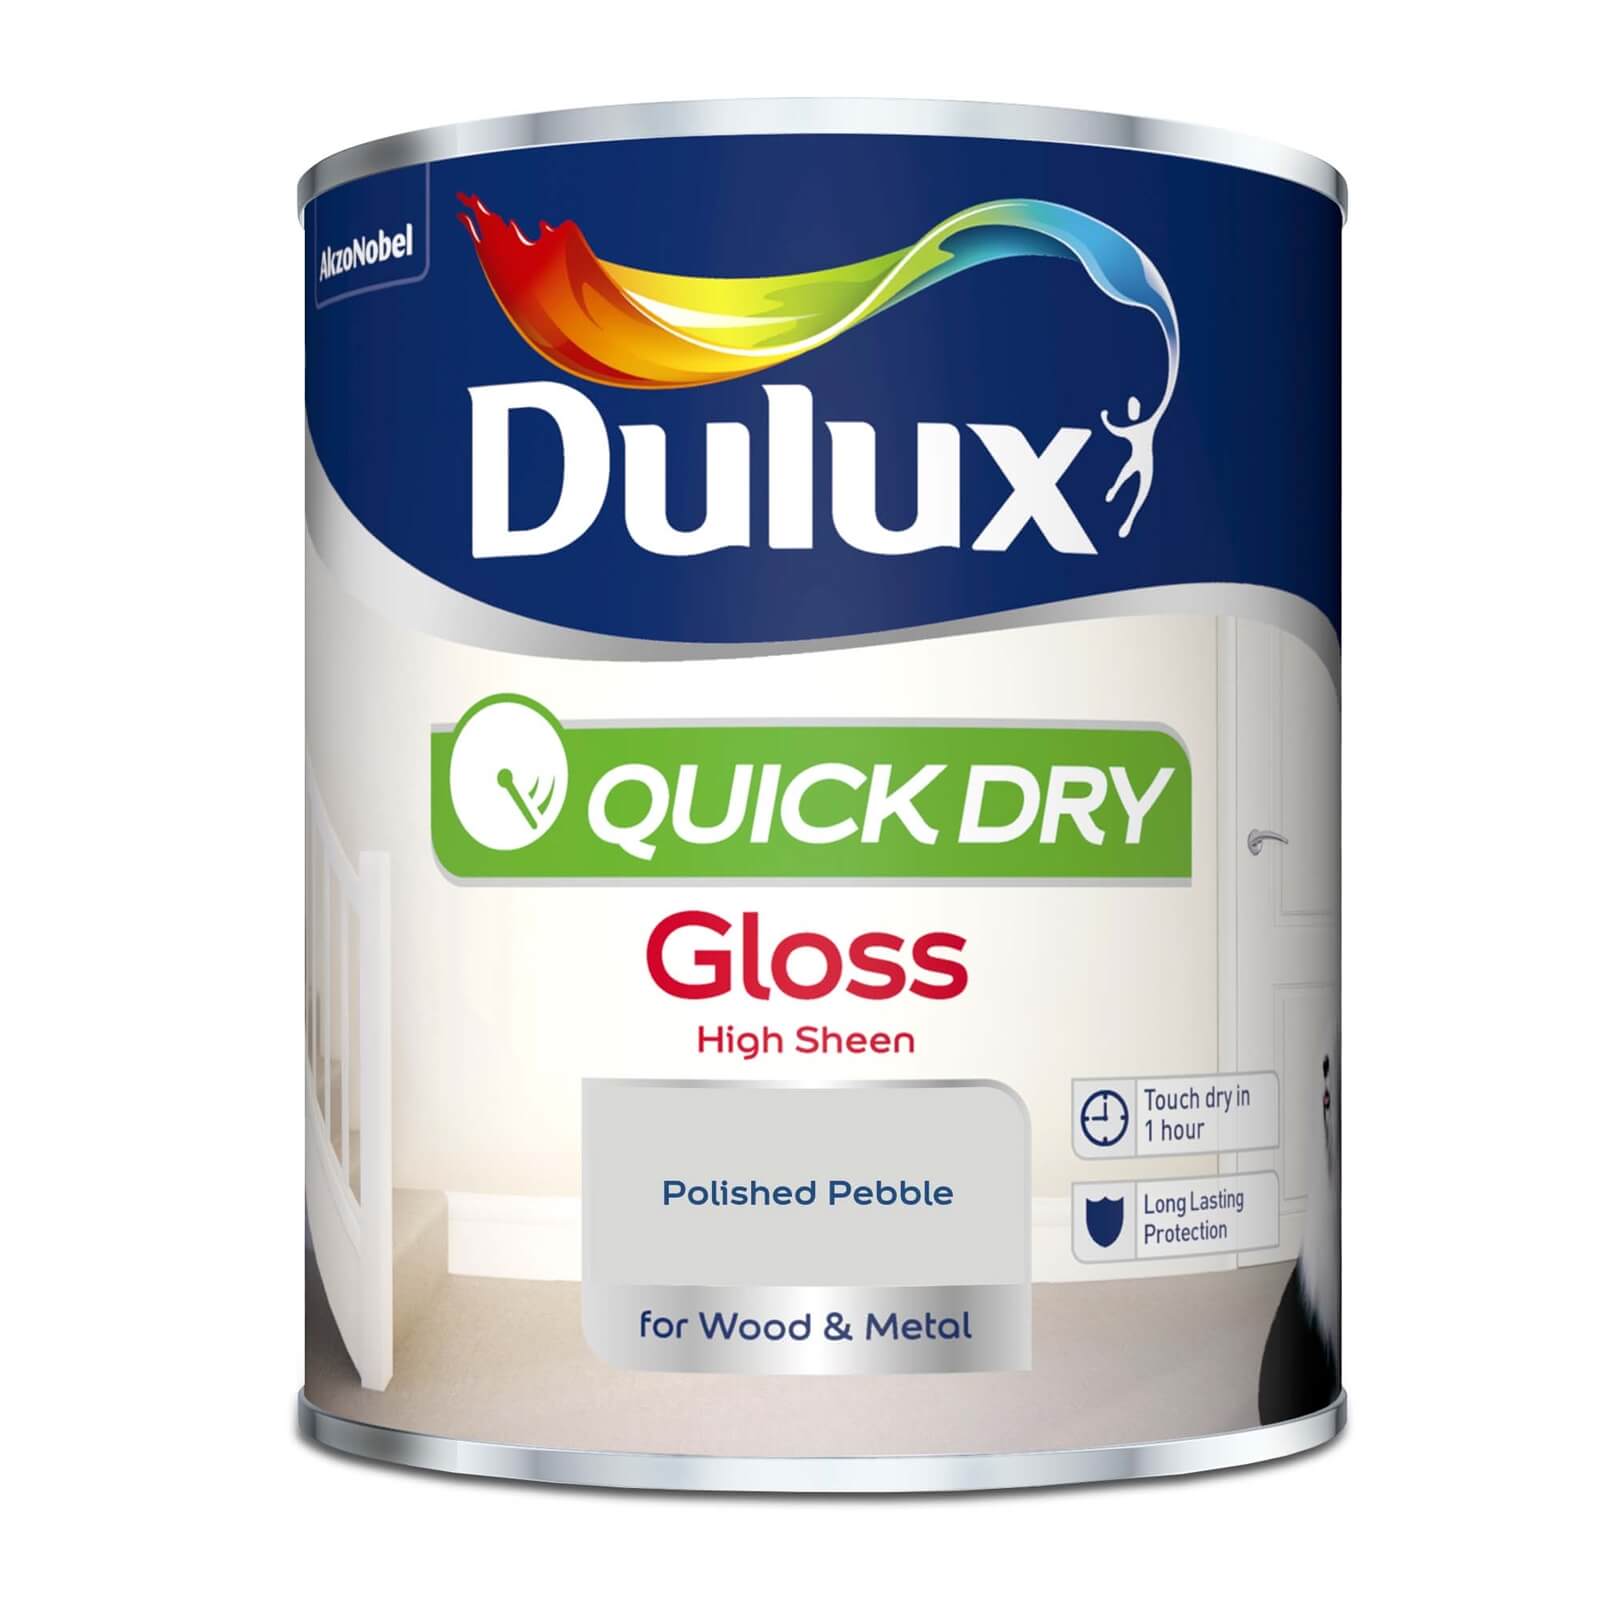 Dulux Quick Dry Gloss Paint Polished Pebble - 750ml